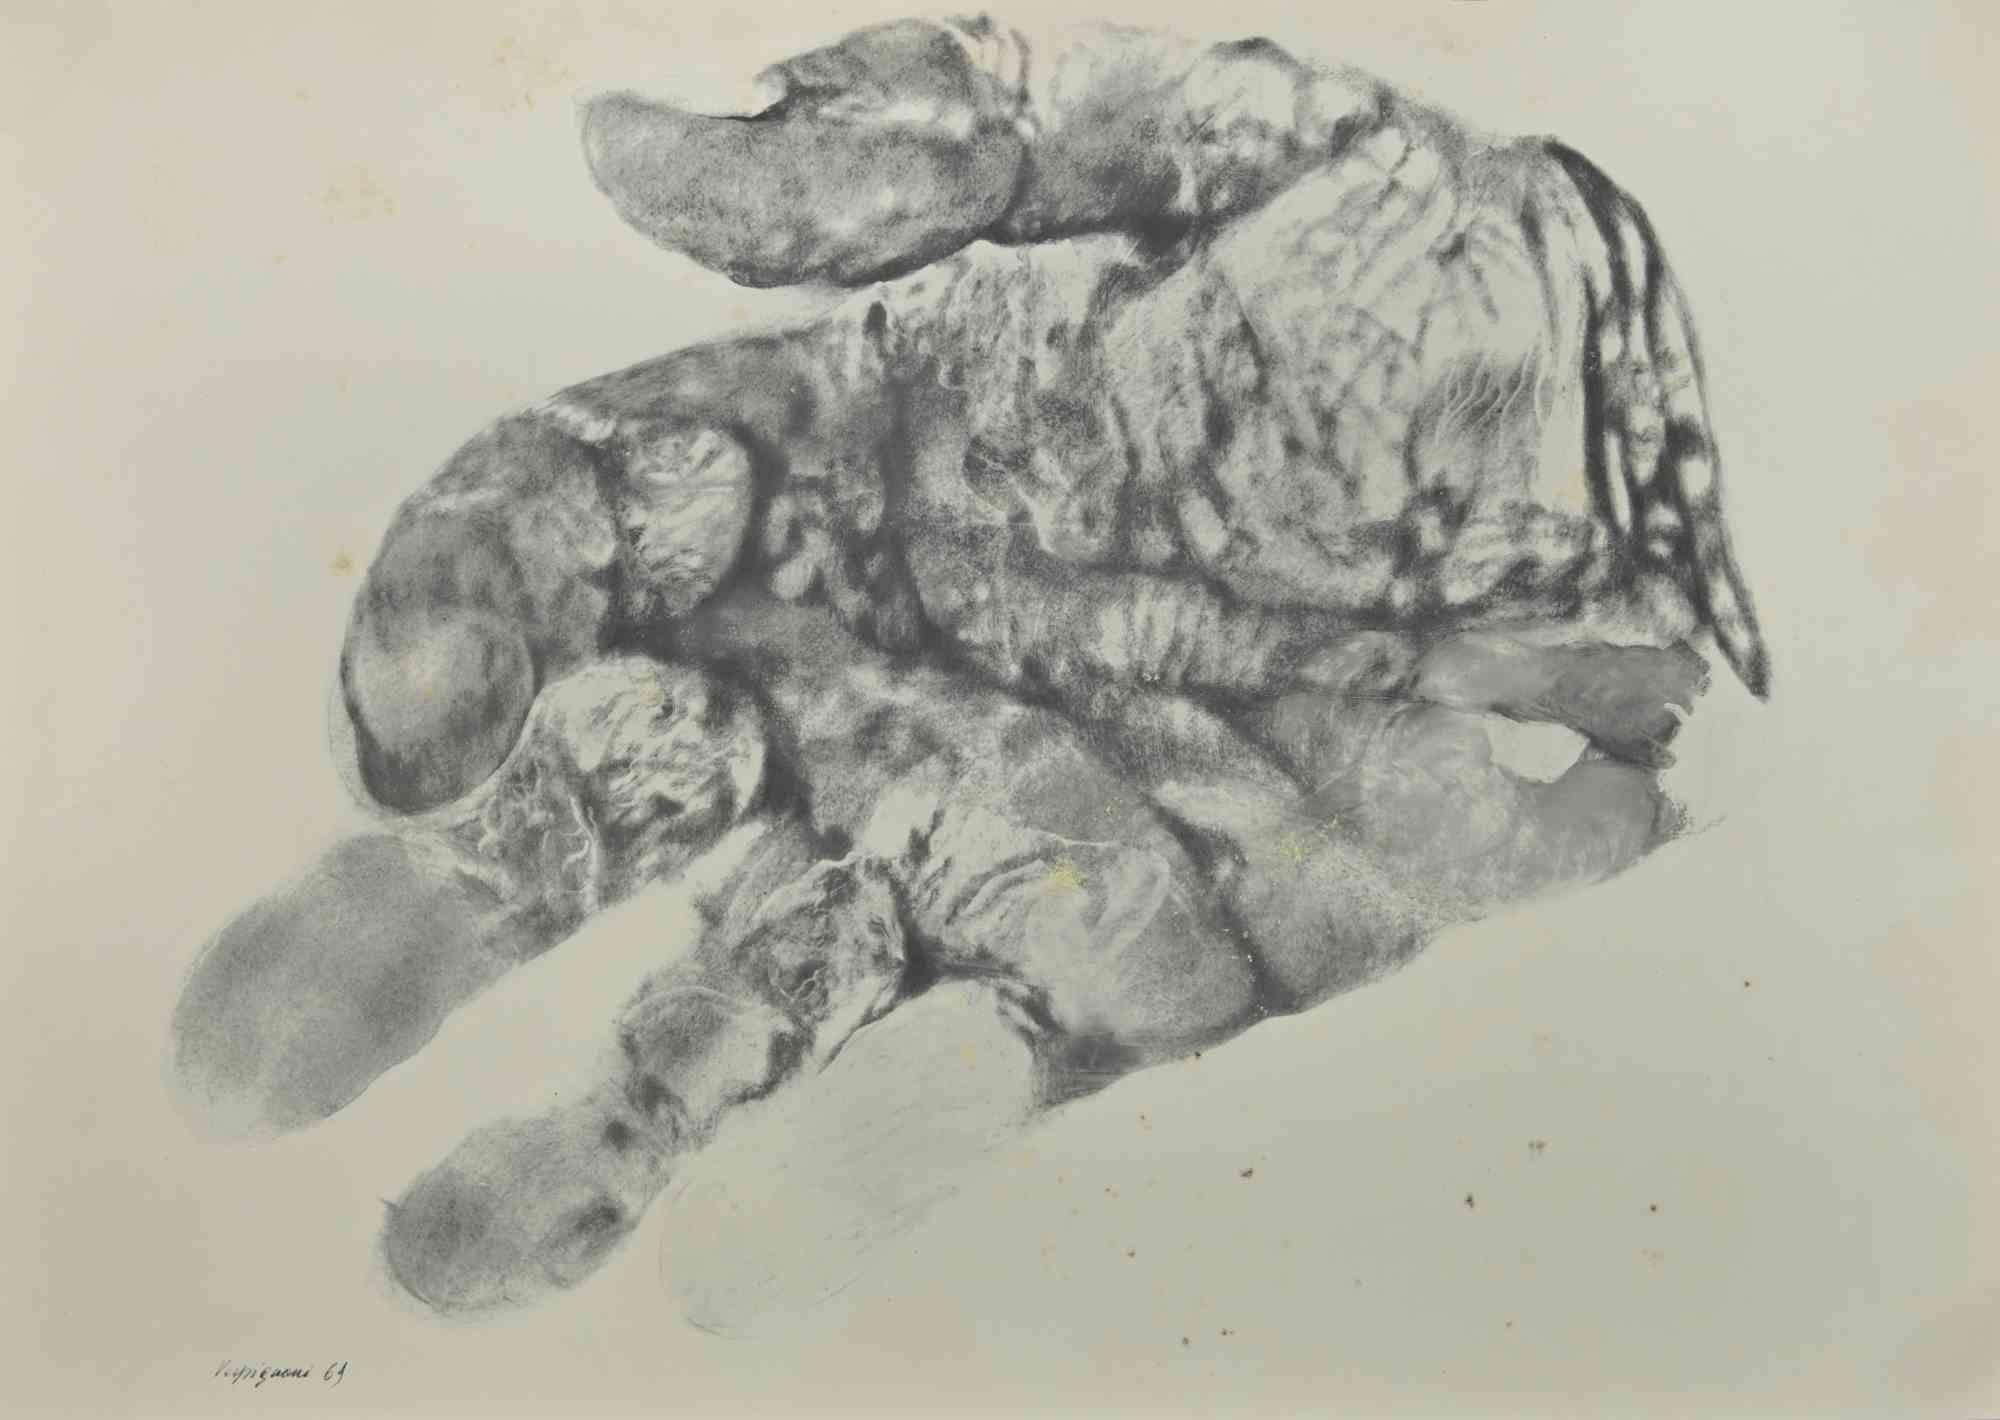 The Hand is a phototype print reproducing drawing by Renzo Vespignani of the 1960s

Signed on the plate lower right.

The artwork is depicted through strong strokes and perfect hatchings.